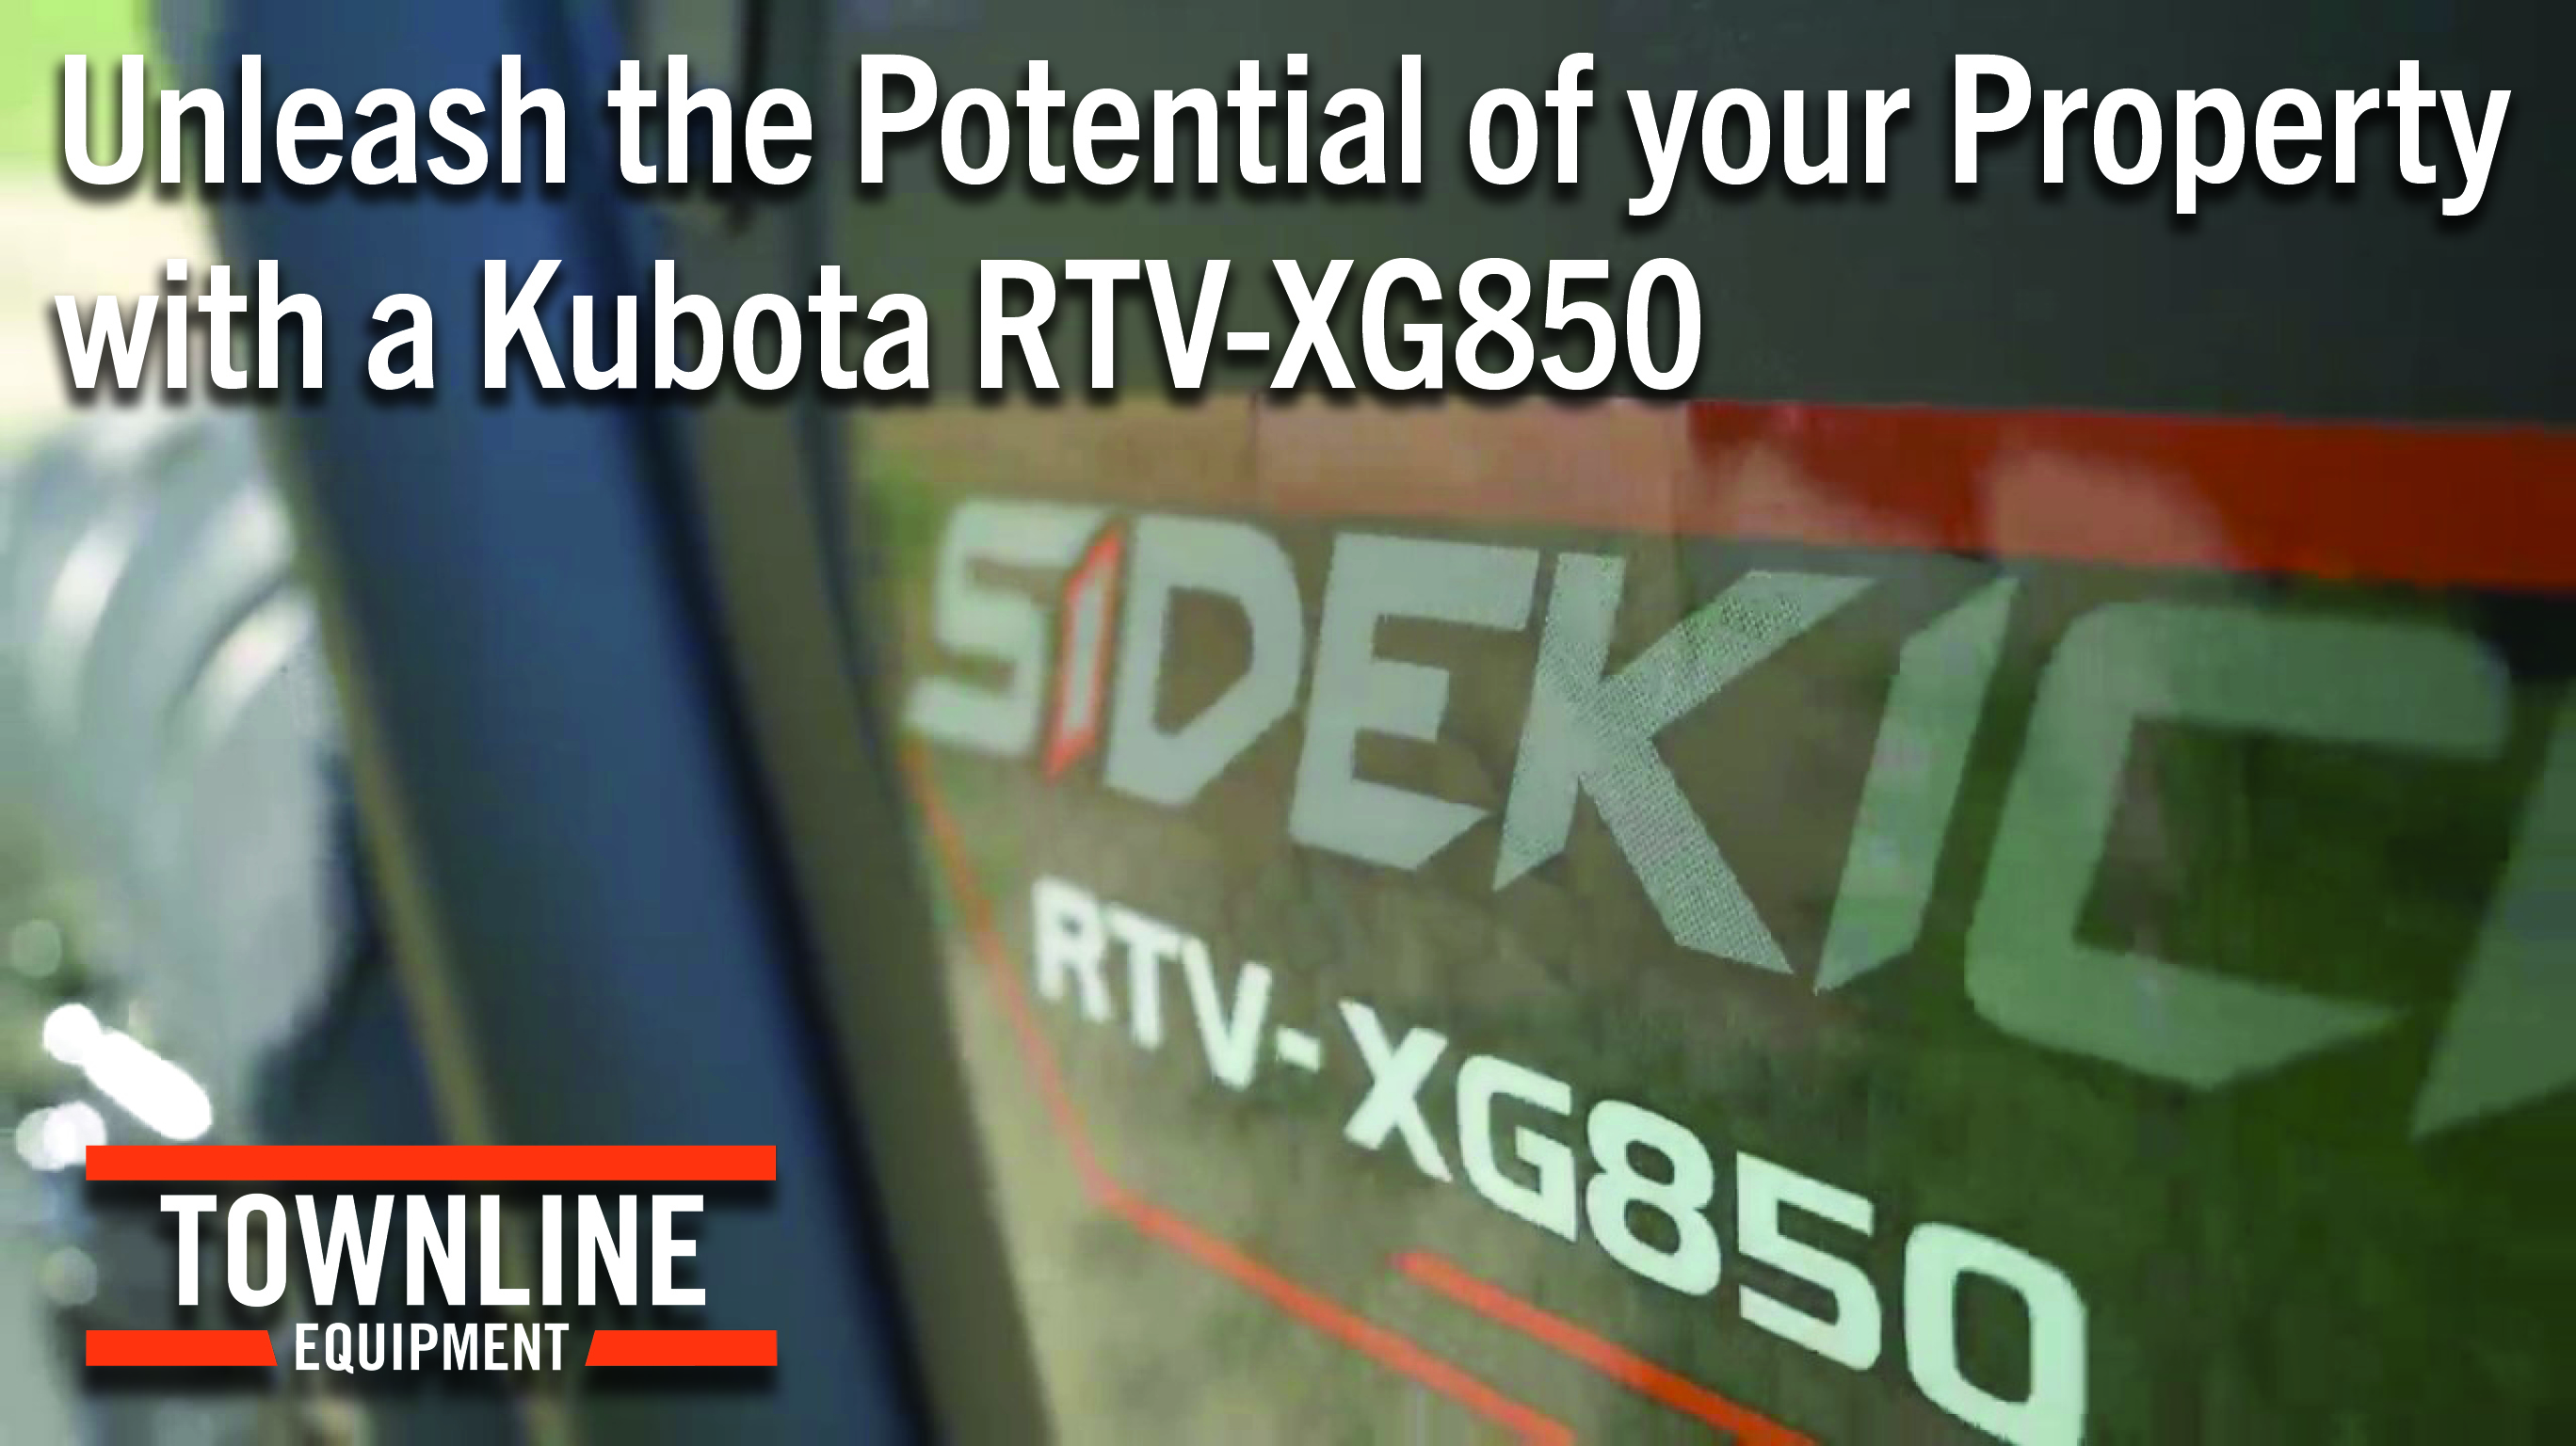 Unleash the Potential of your Property with a Kubota RTV-XG850